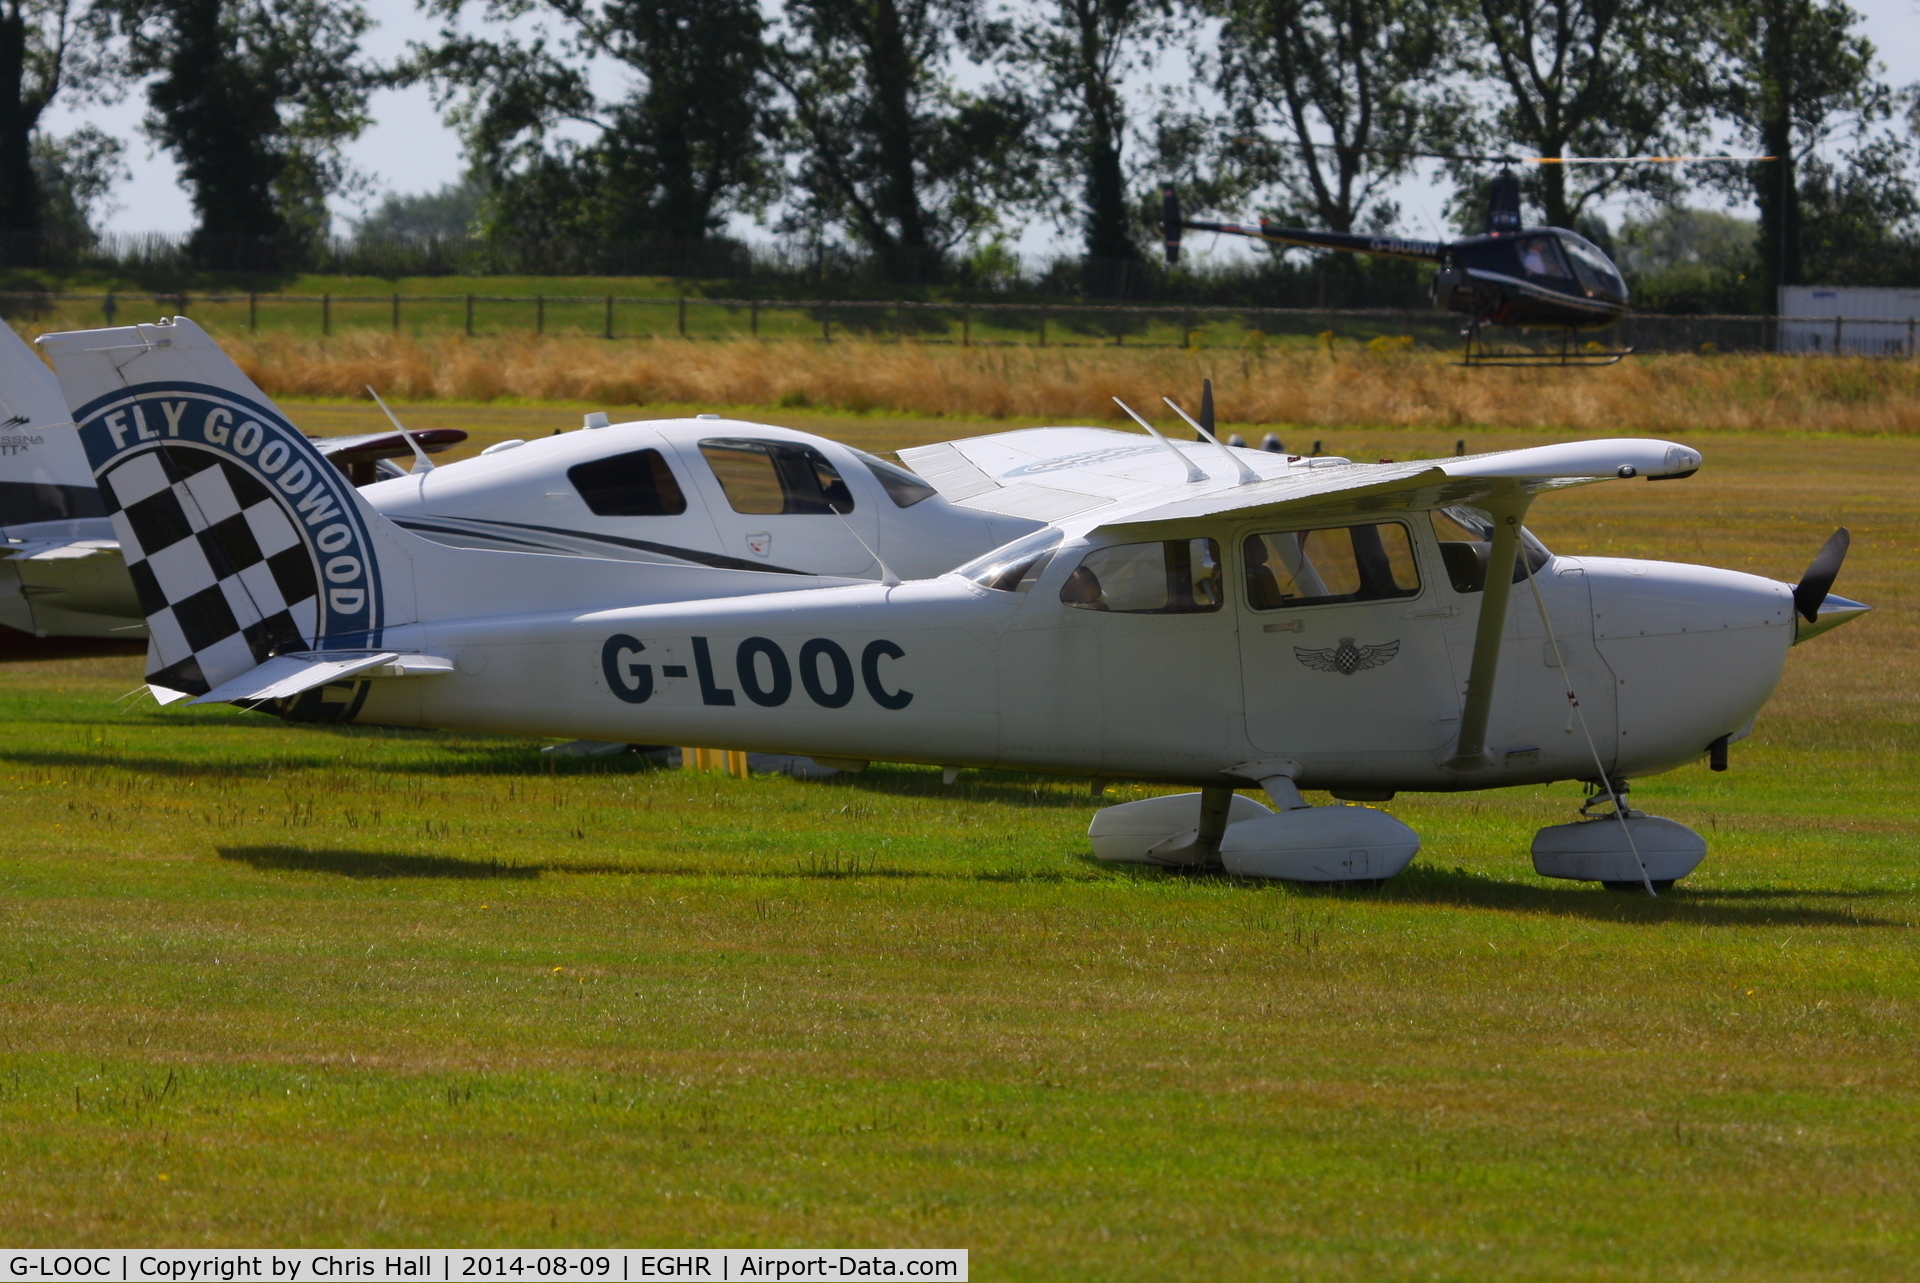 G-LOOC, 2009 Cessna 172S C/N 172S11006, at Goodwood airfield